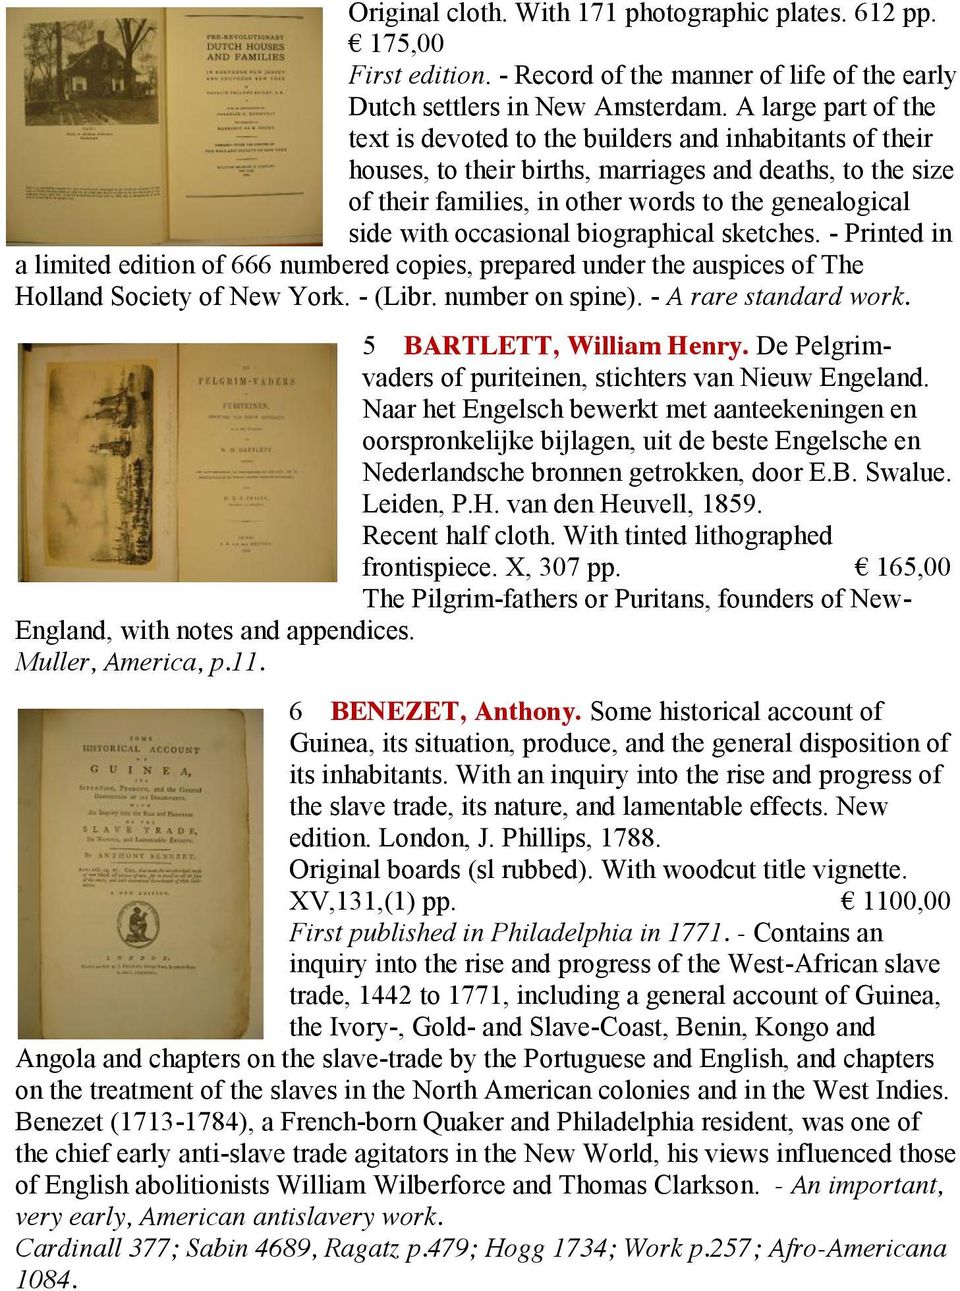 occasional biographical sketches. - Printed in a limited edition of 666 numbered copies, prepared under the auspices of The Holland Society of New York. - (Libr. number on spine).